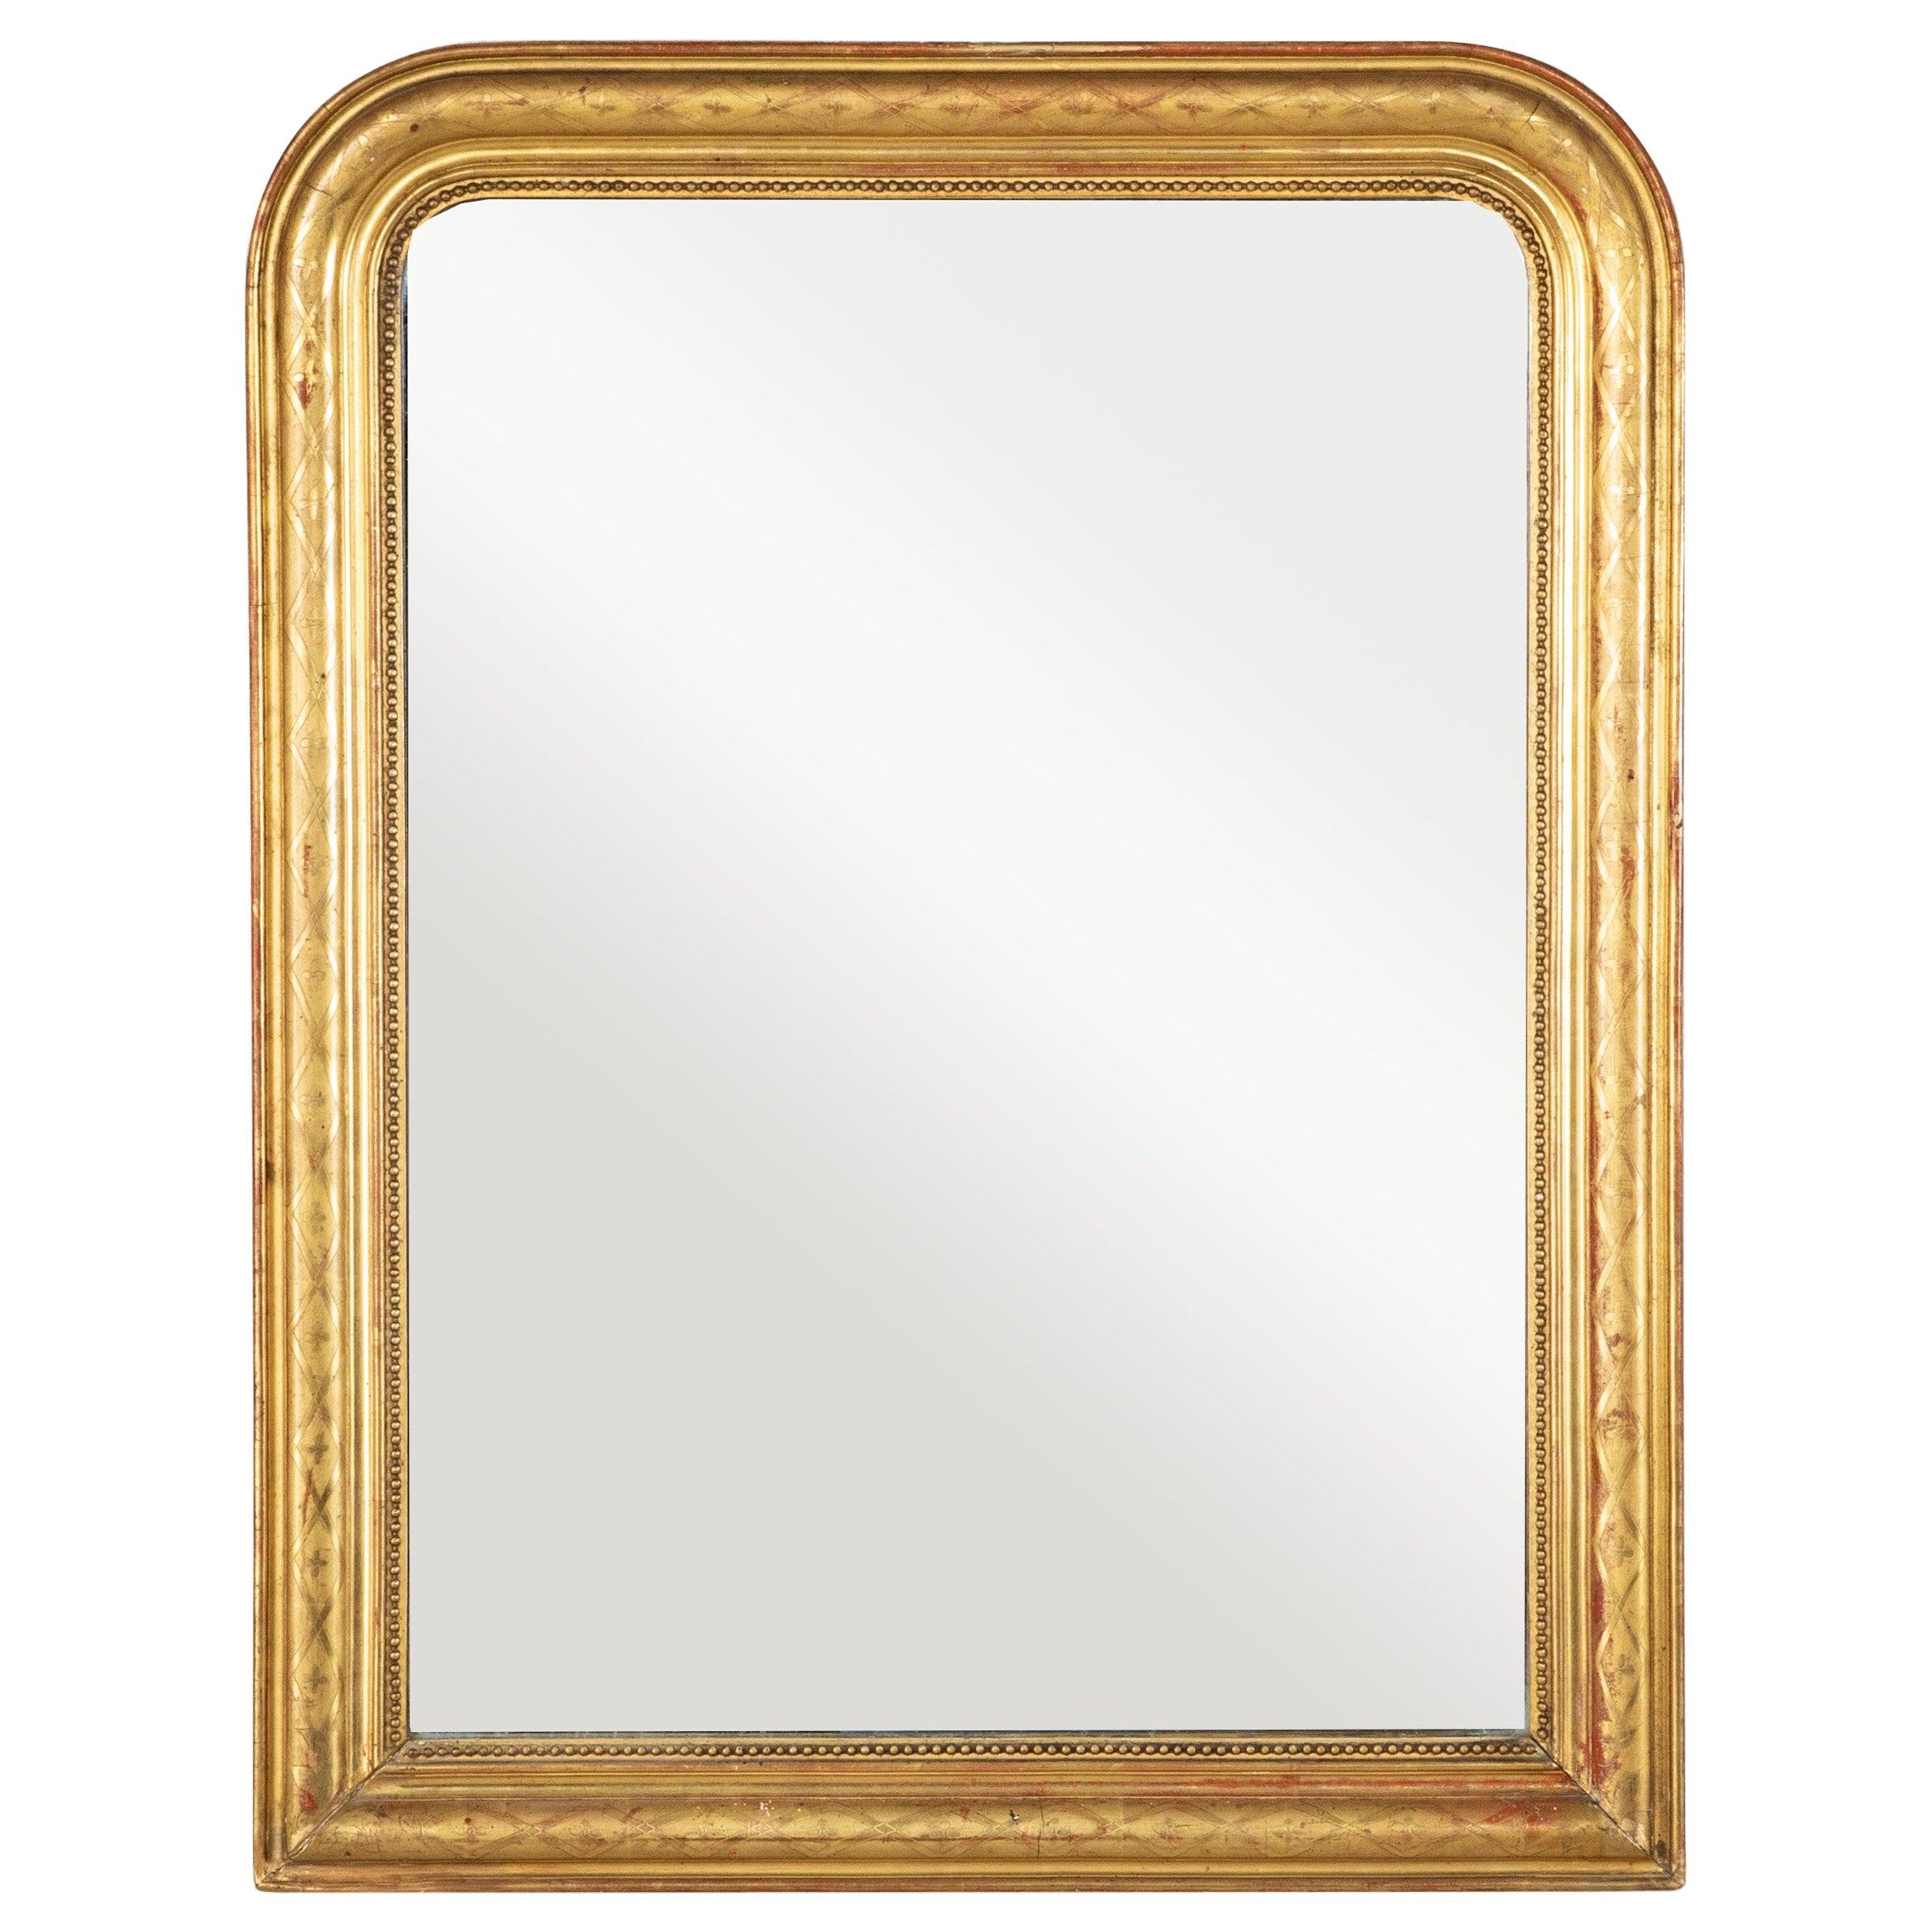 Mid-19th Century French Louis Philippe Period Giltwood Mirror